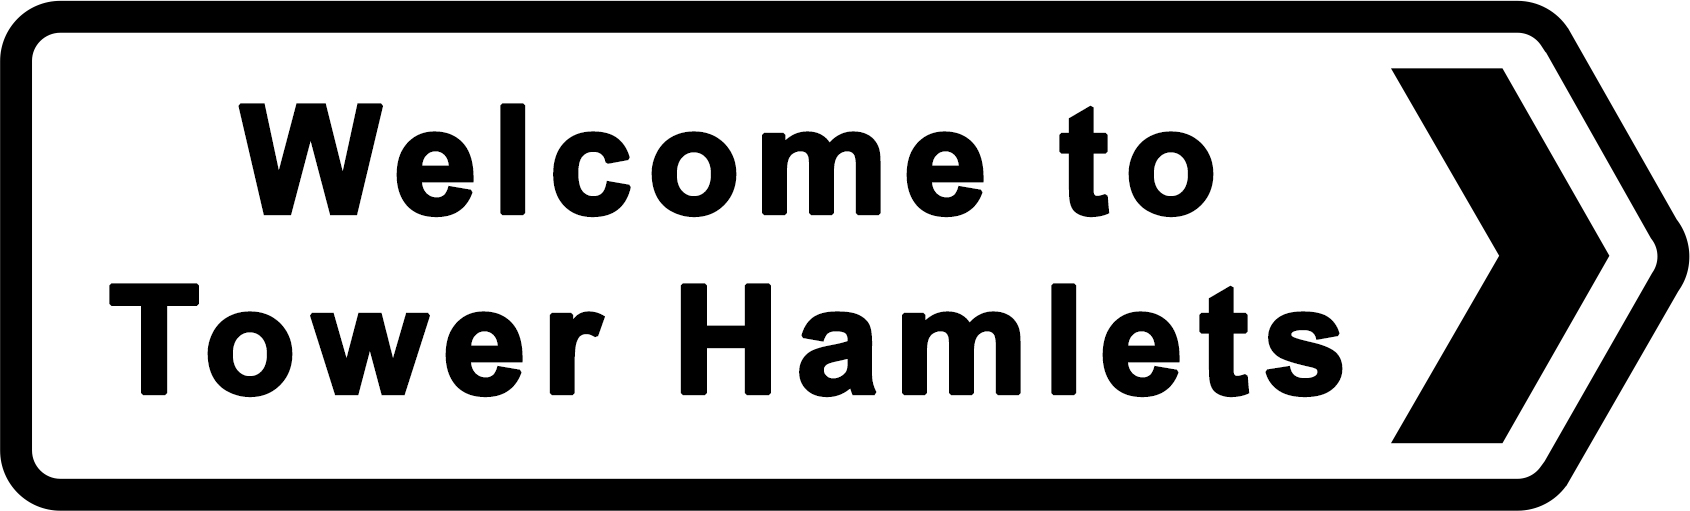 Tower Hamlet's coat of arms - Cheap Driving Schools Lessons in London borough of Tower Hamlets, East London E14, Greater London